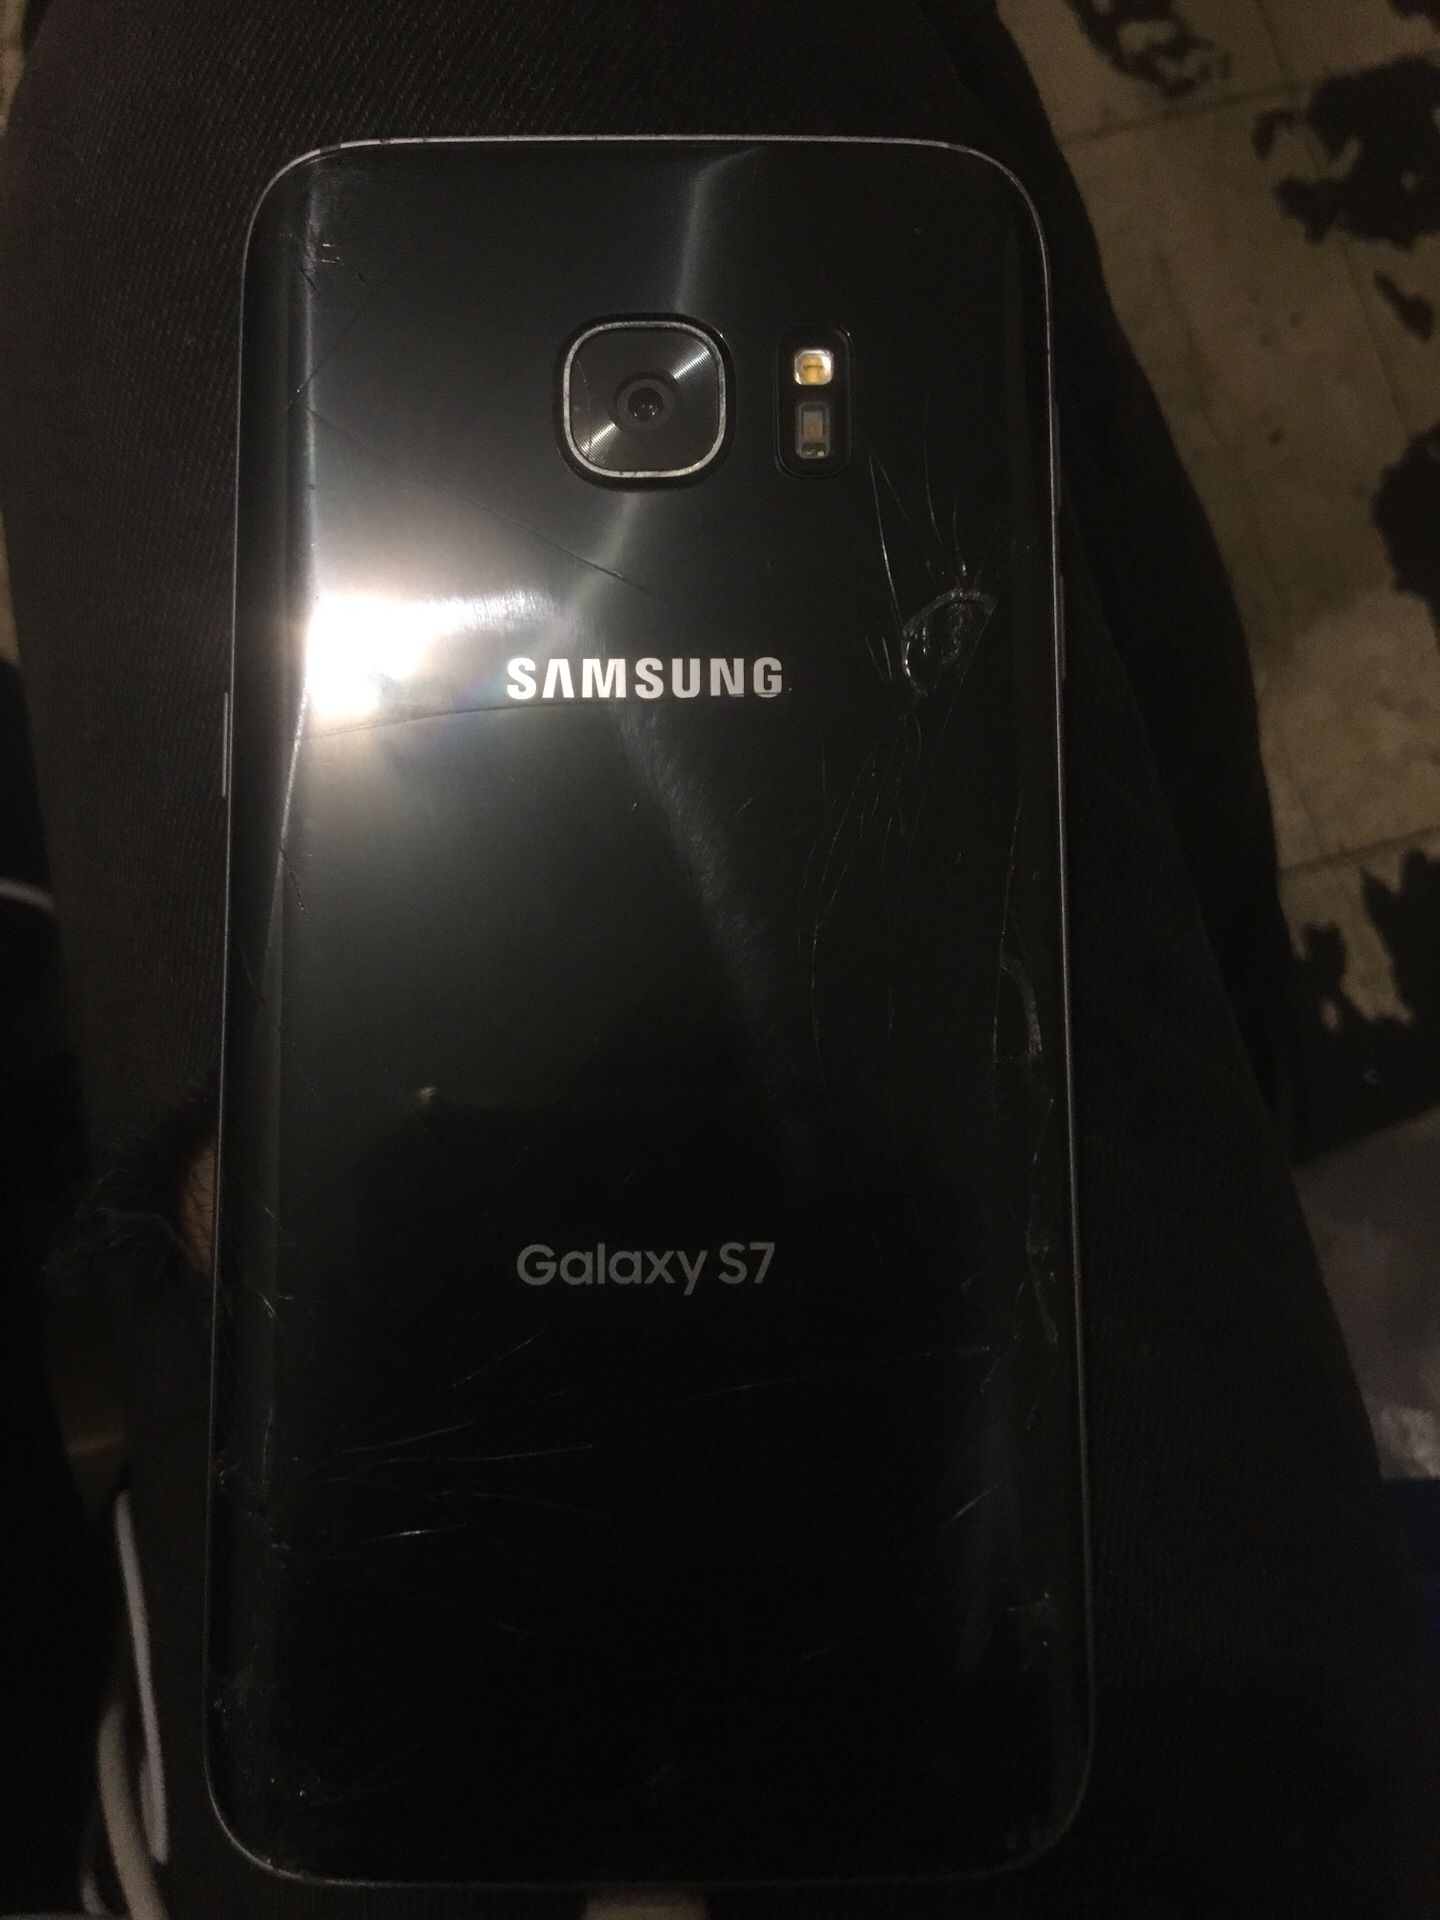 Samsung Galaxy S7 (Price is negotiable)